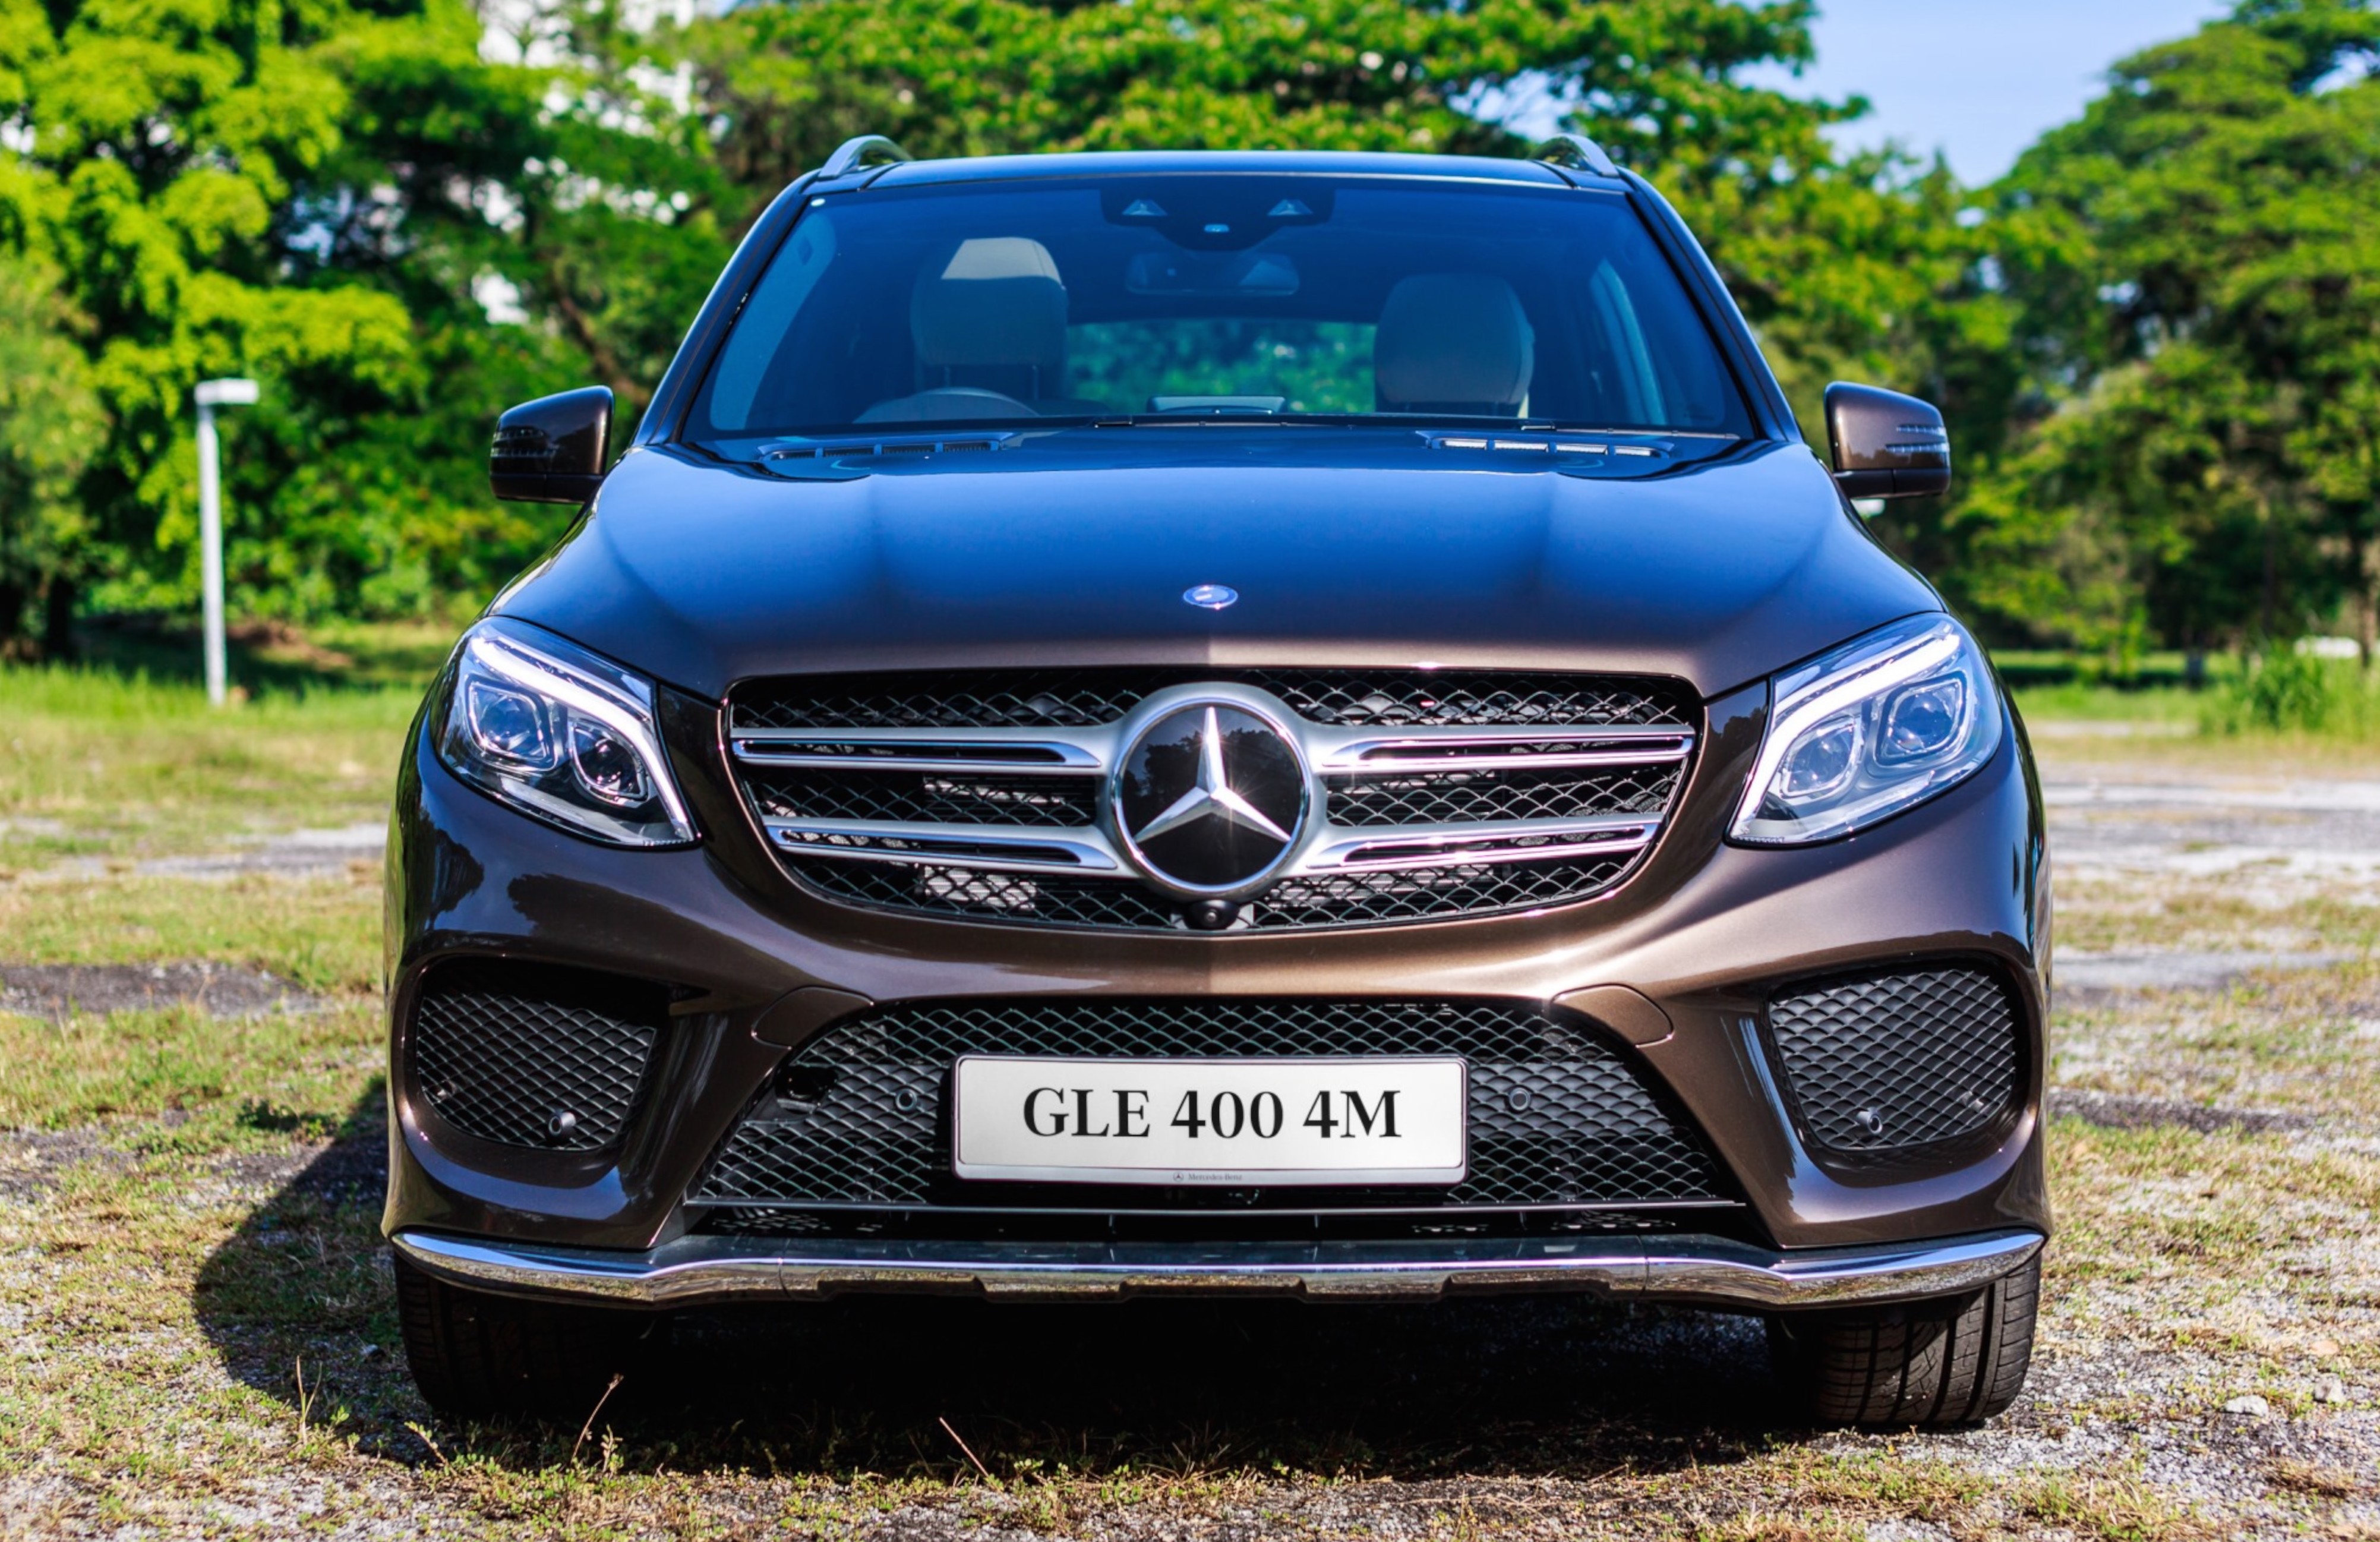 Mercedes-Benz GLE 400, GLE 250 d debut in Malaysia Image 428535